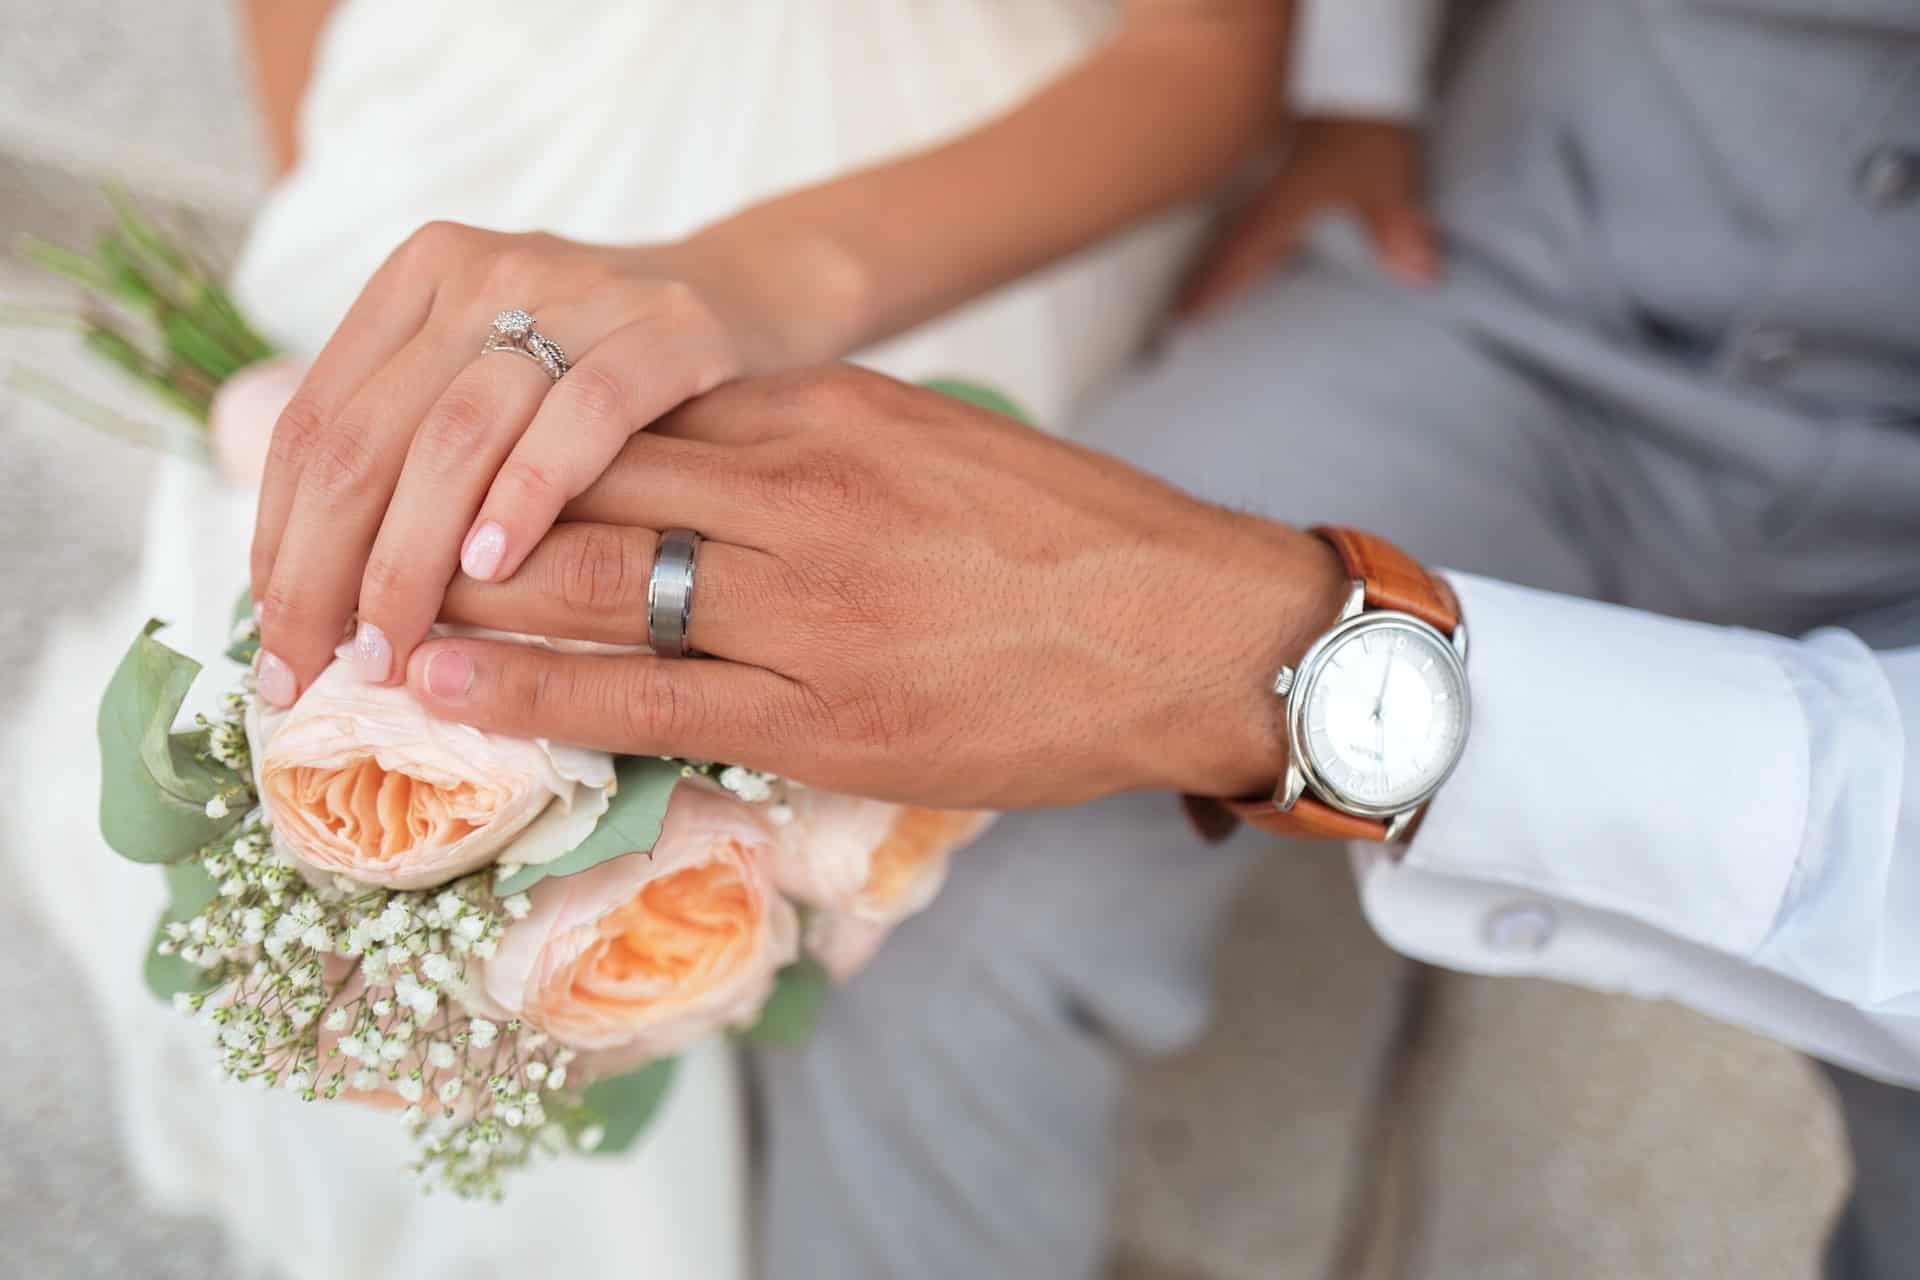 The New Trend In Wedding Fashion: Men’s Camo Wedding Bands and Rings